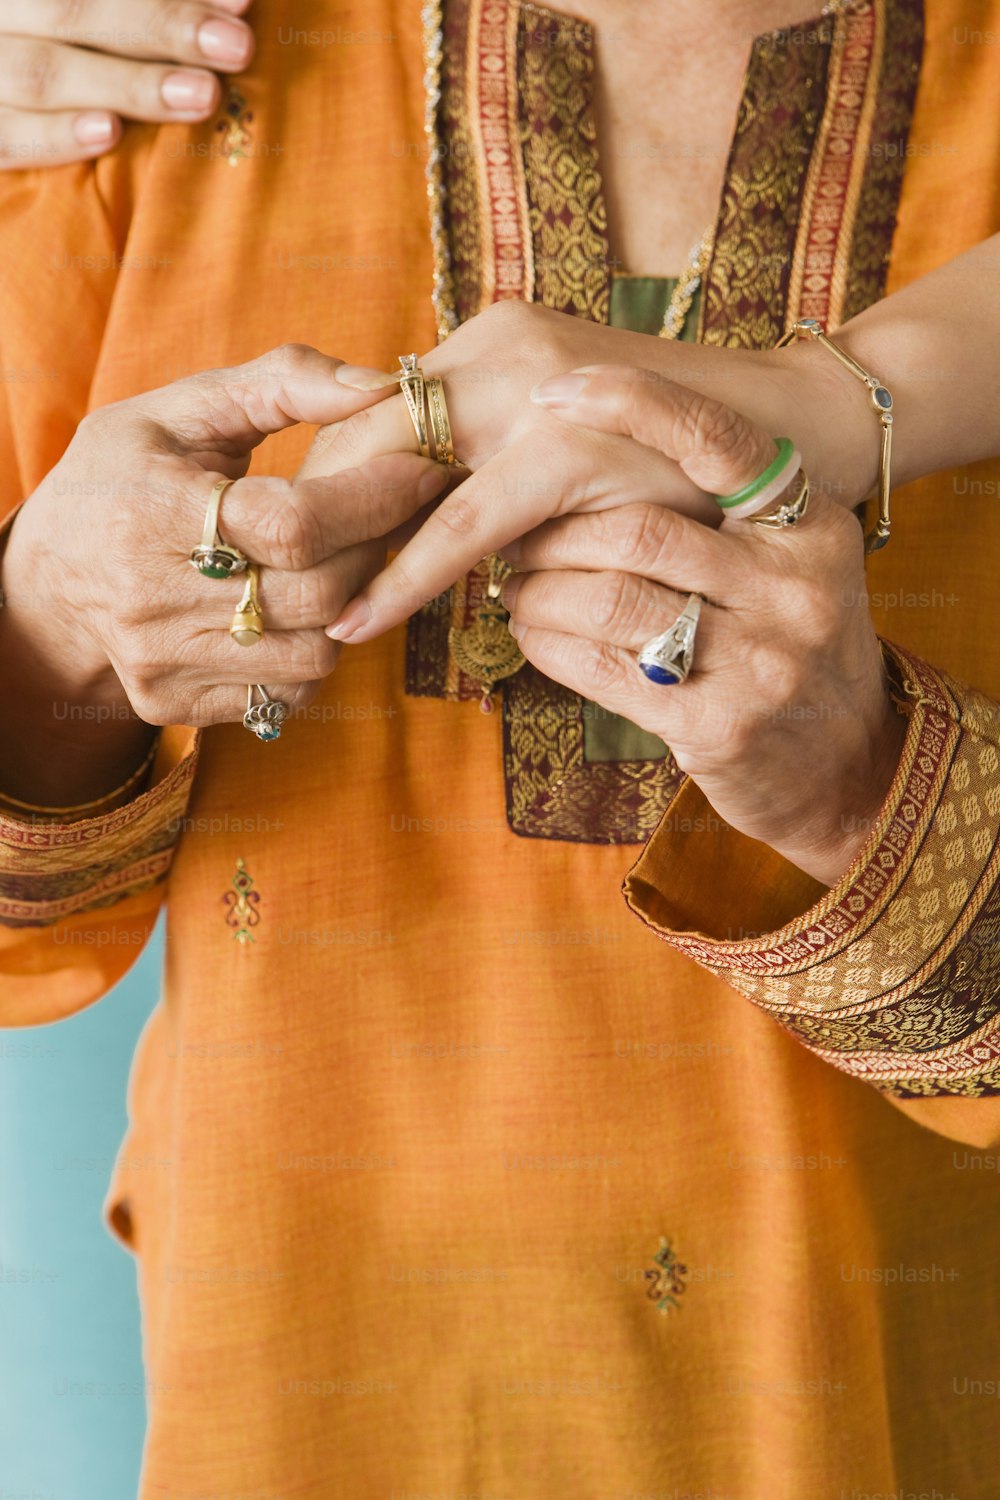 a woman in an orange shirt is holding a ring